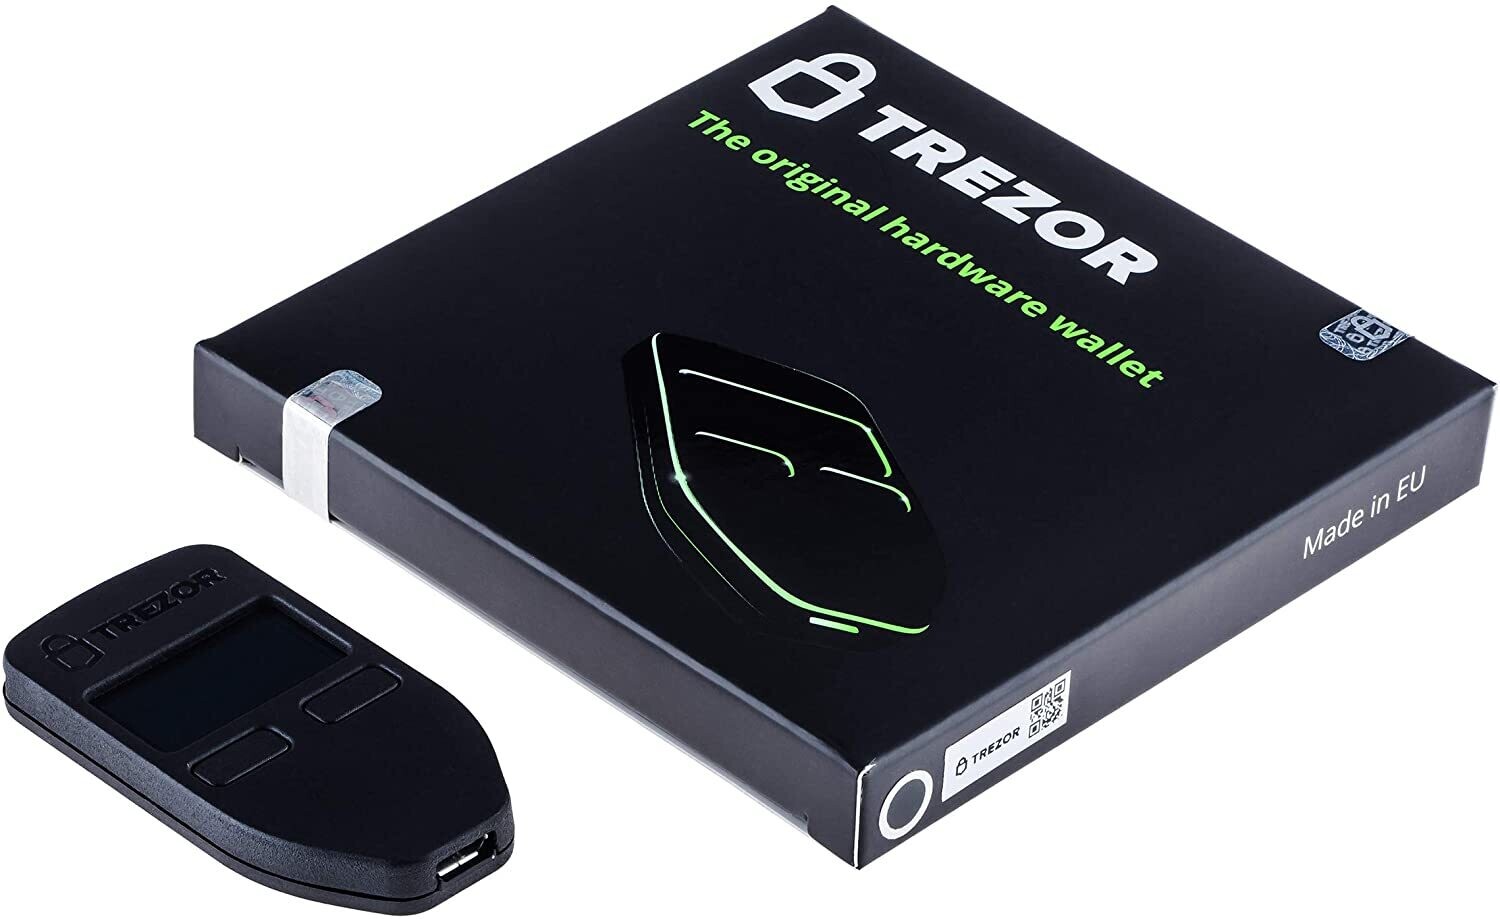 Trezor 1 - BLACK - Crypto Hardware Wallet - The Most Trusted Cold Storage for Bitcoin, Ethereum, ERC20 and Many More